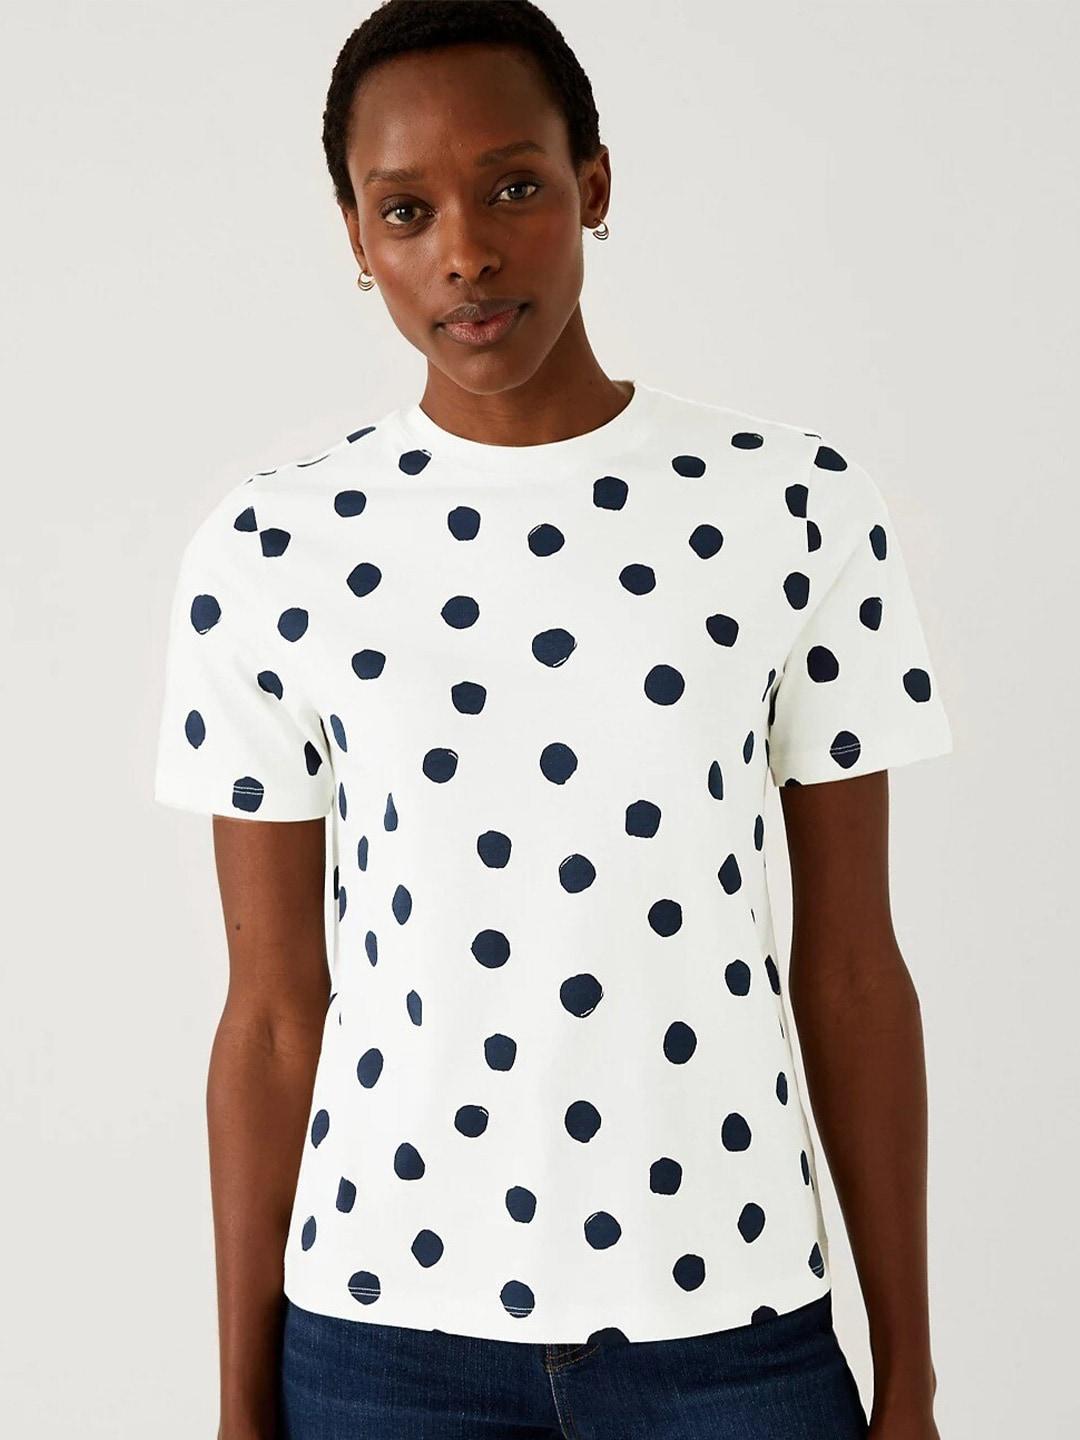 marks & spencer conversational printed pure cotton t-shirt